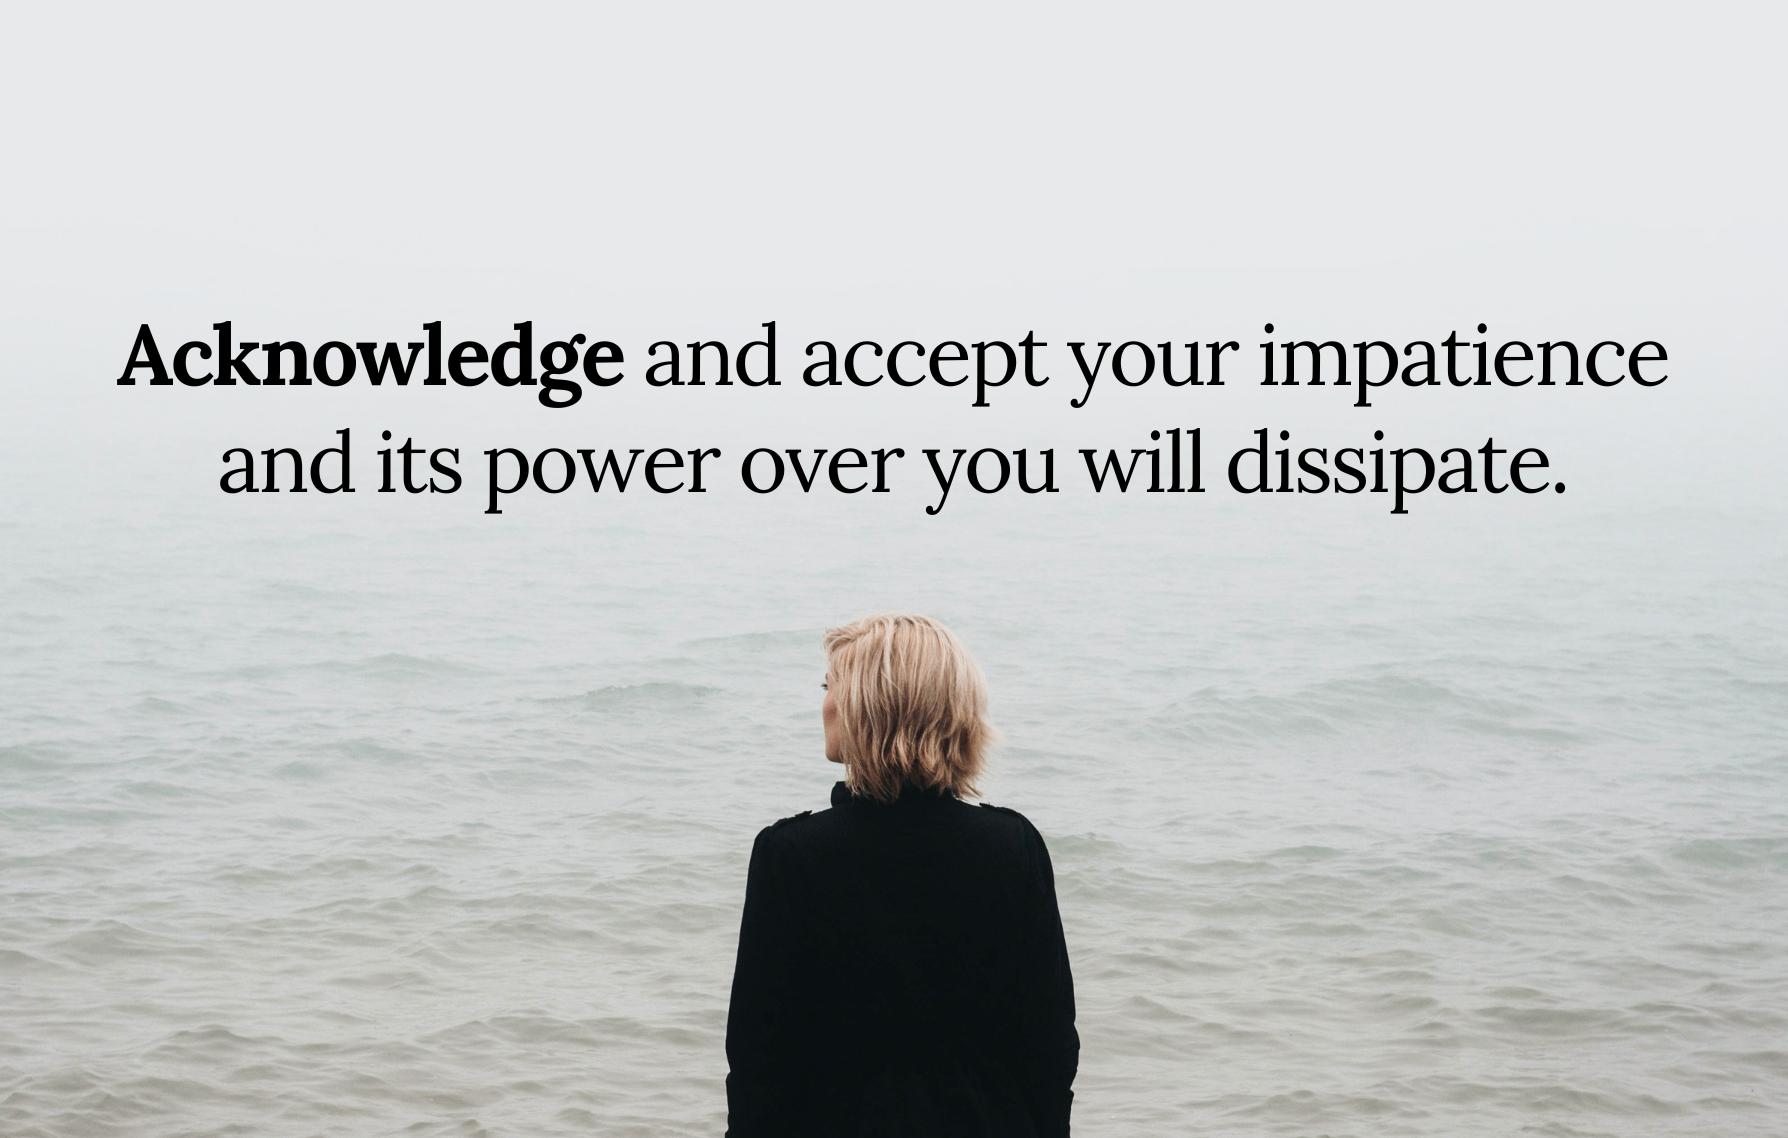 Acknowledge and accept your impatience and its power over you will dissipate.